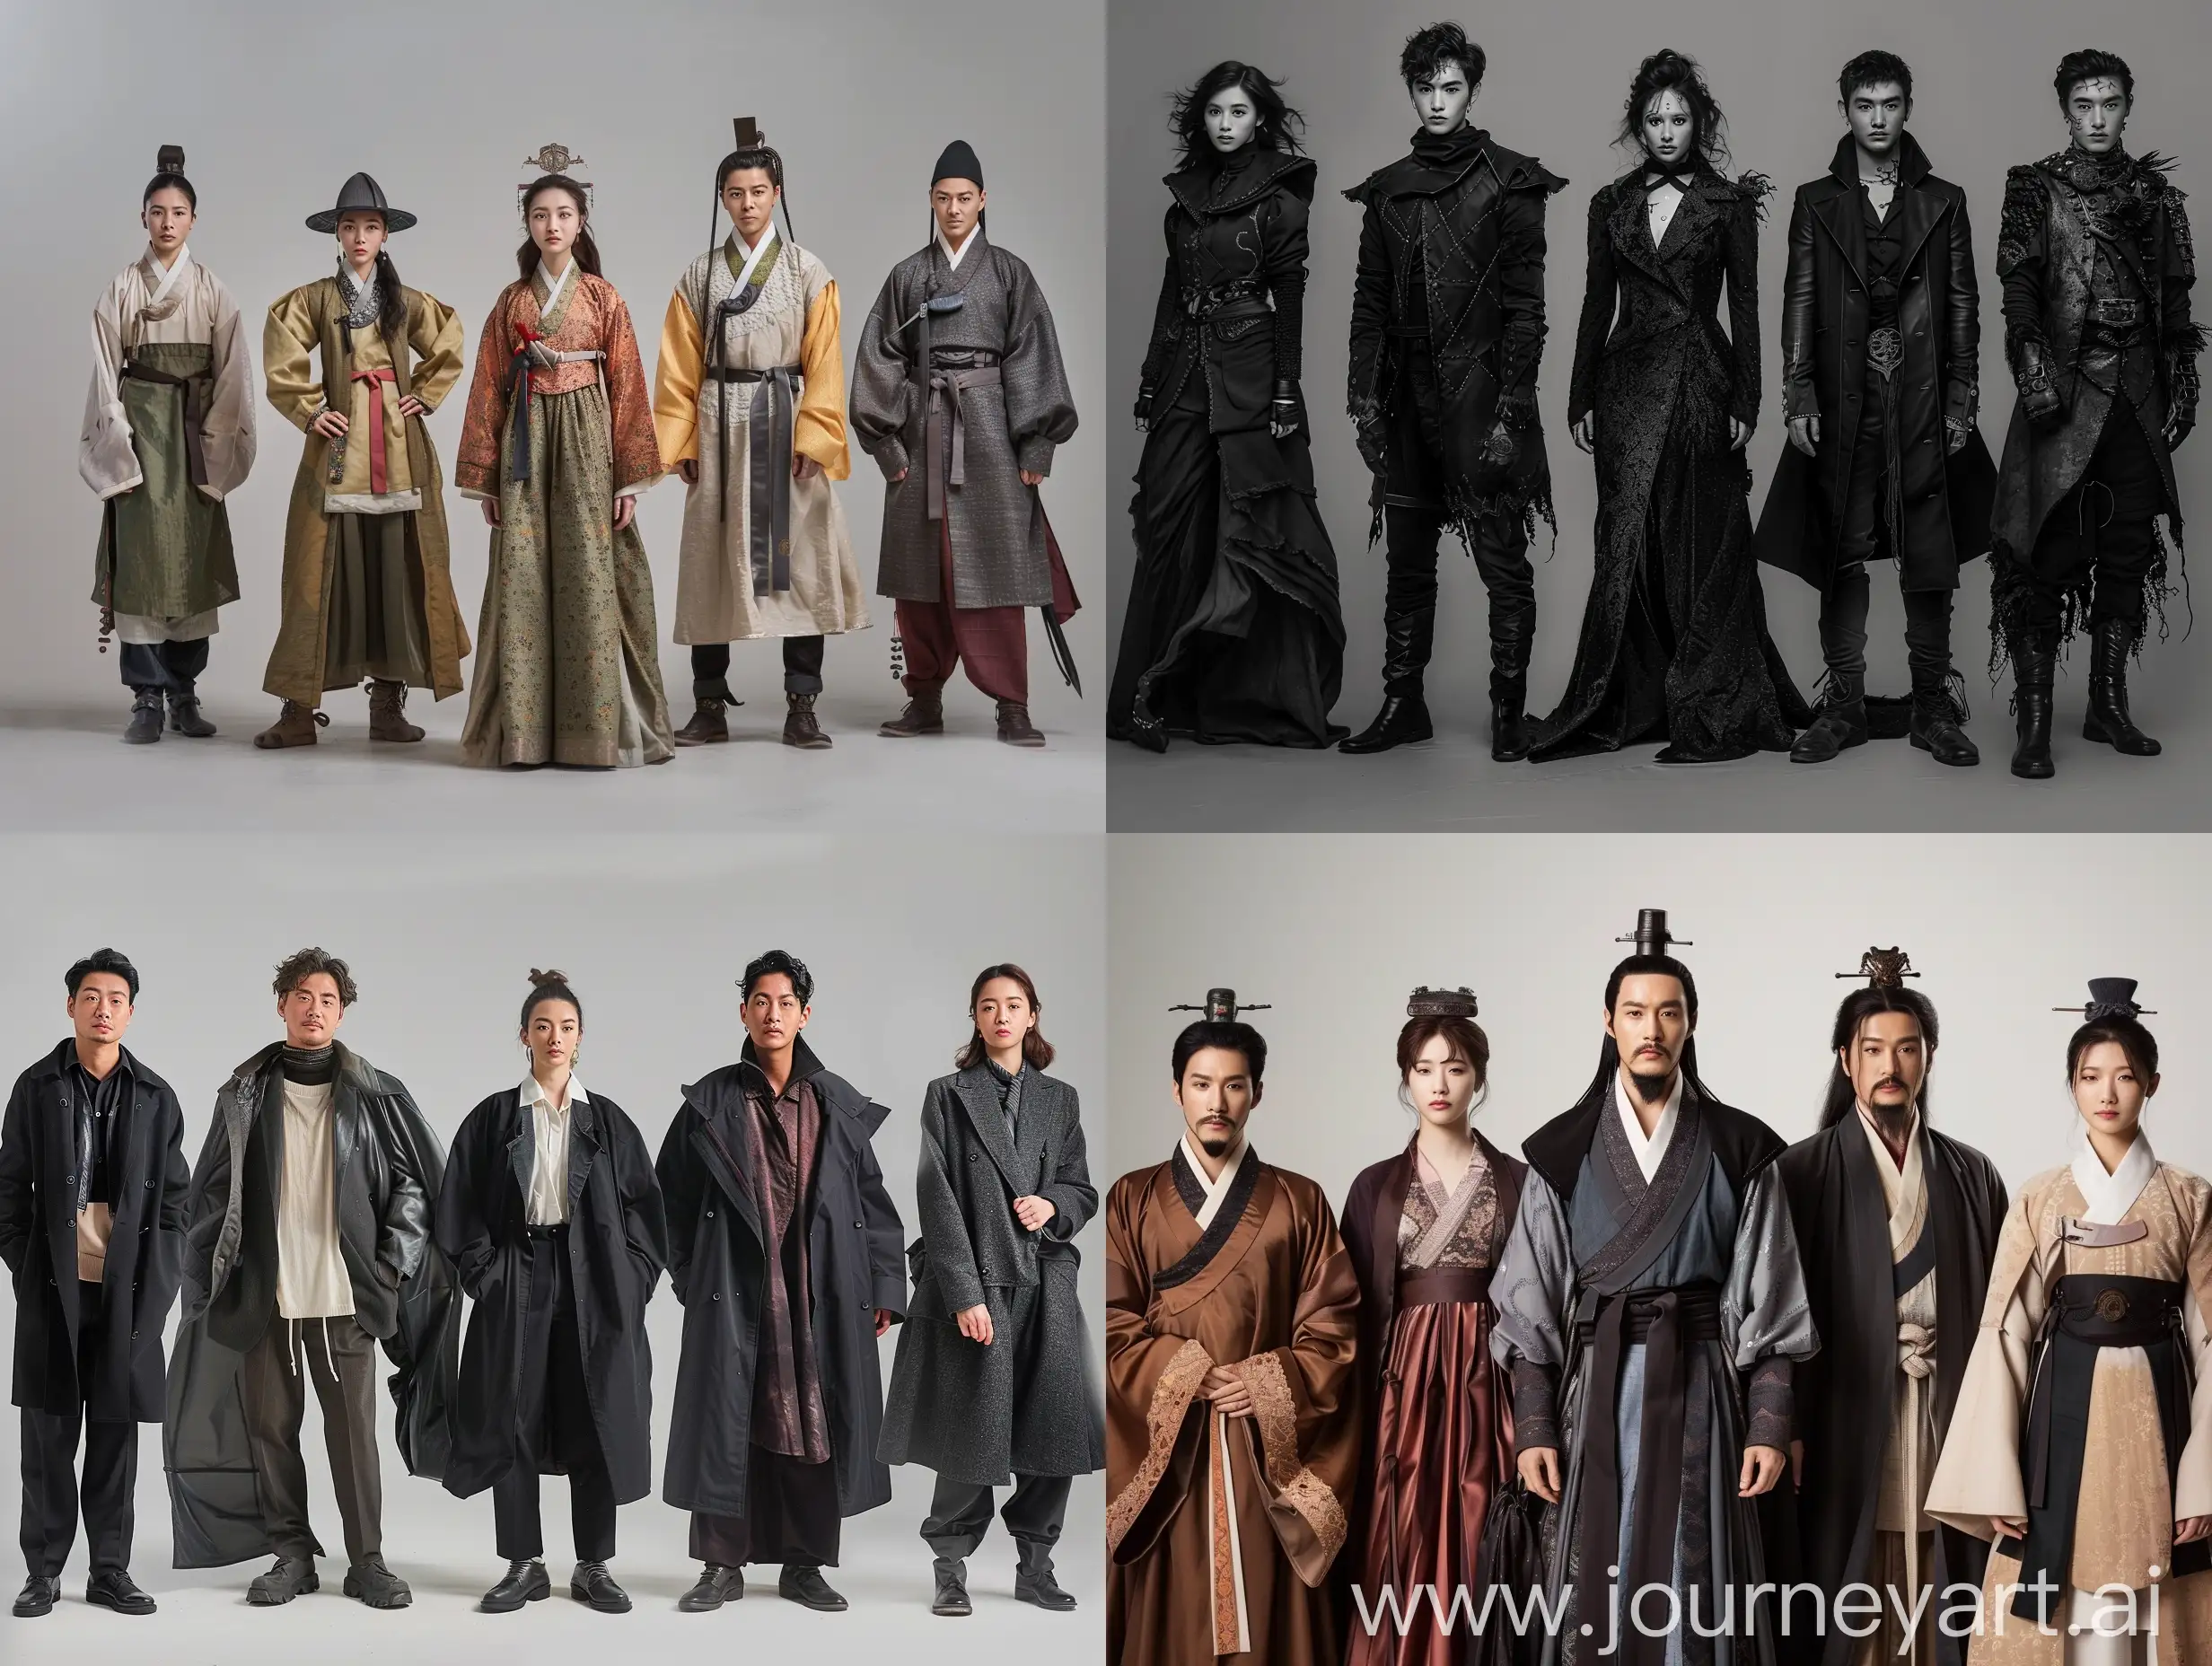 dramatis personae actors lineup of movie heroes styled by Seung Eun Kim ar Image